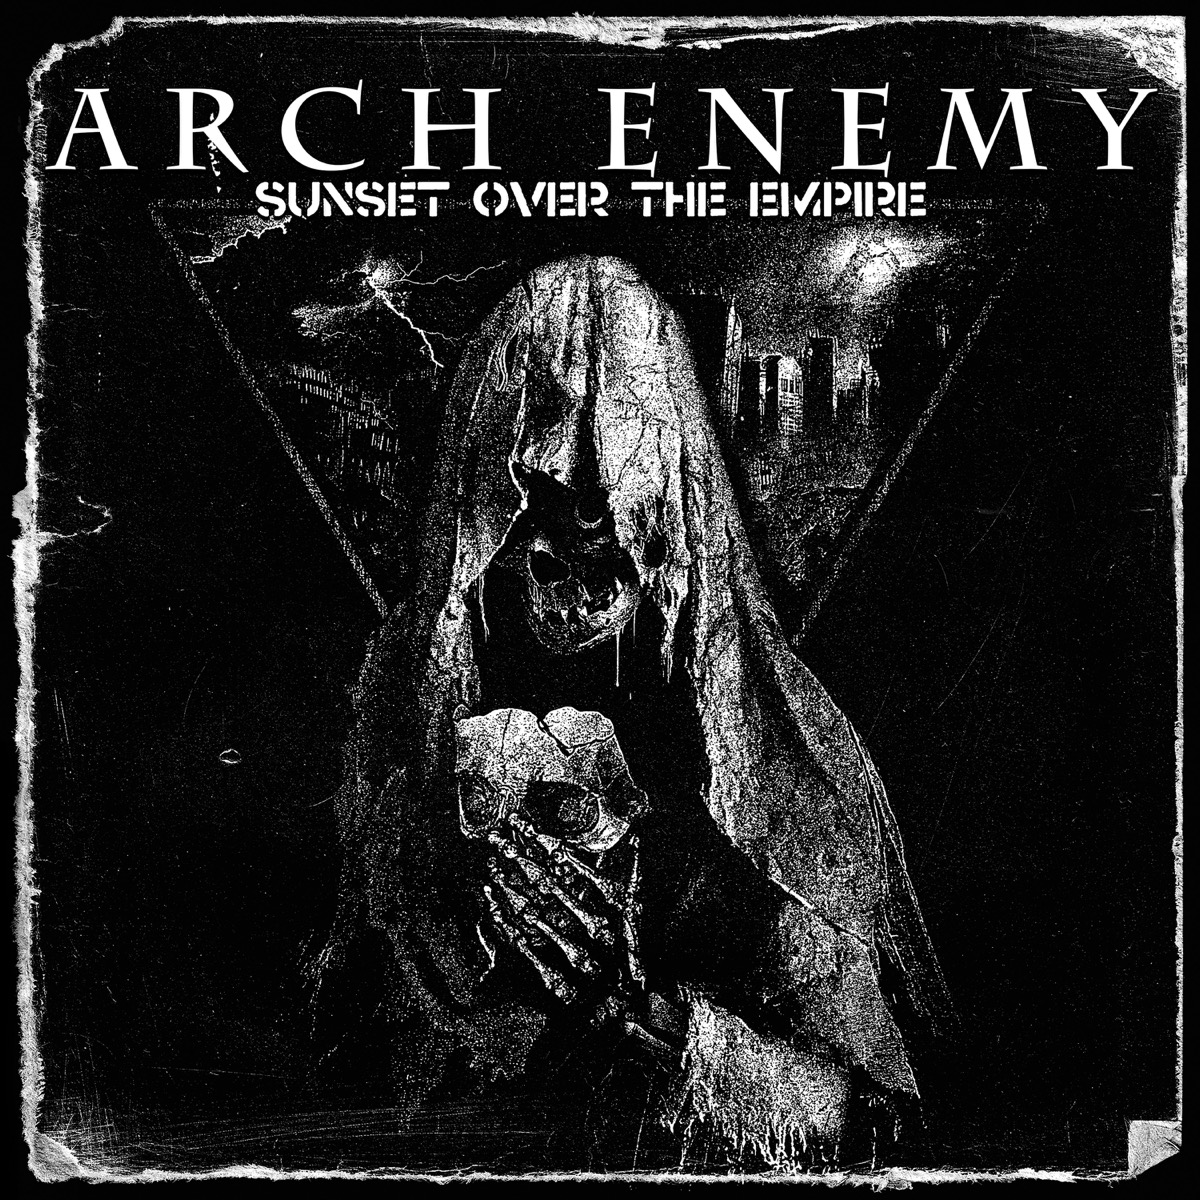 Arch Enemy "Sunset Over The Empire" singolo cover SpazioRock